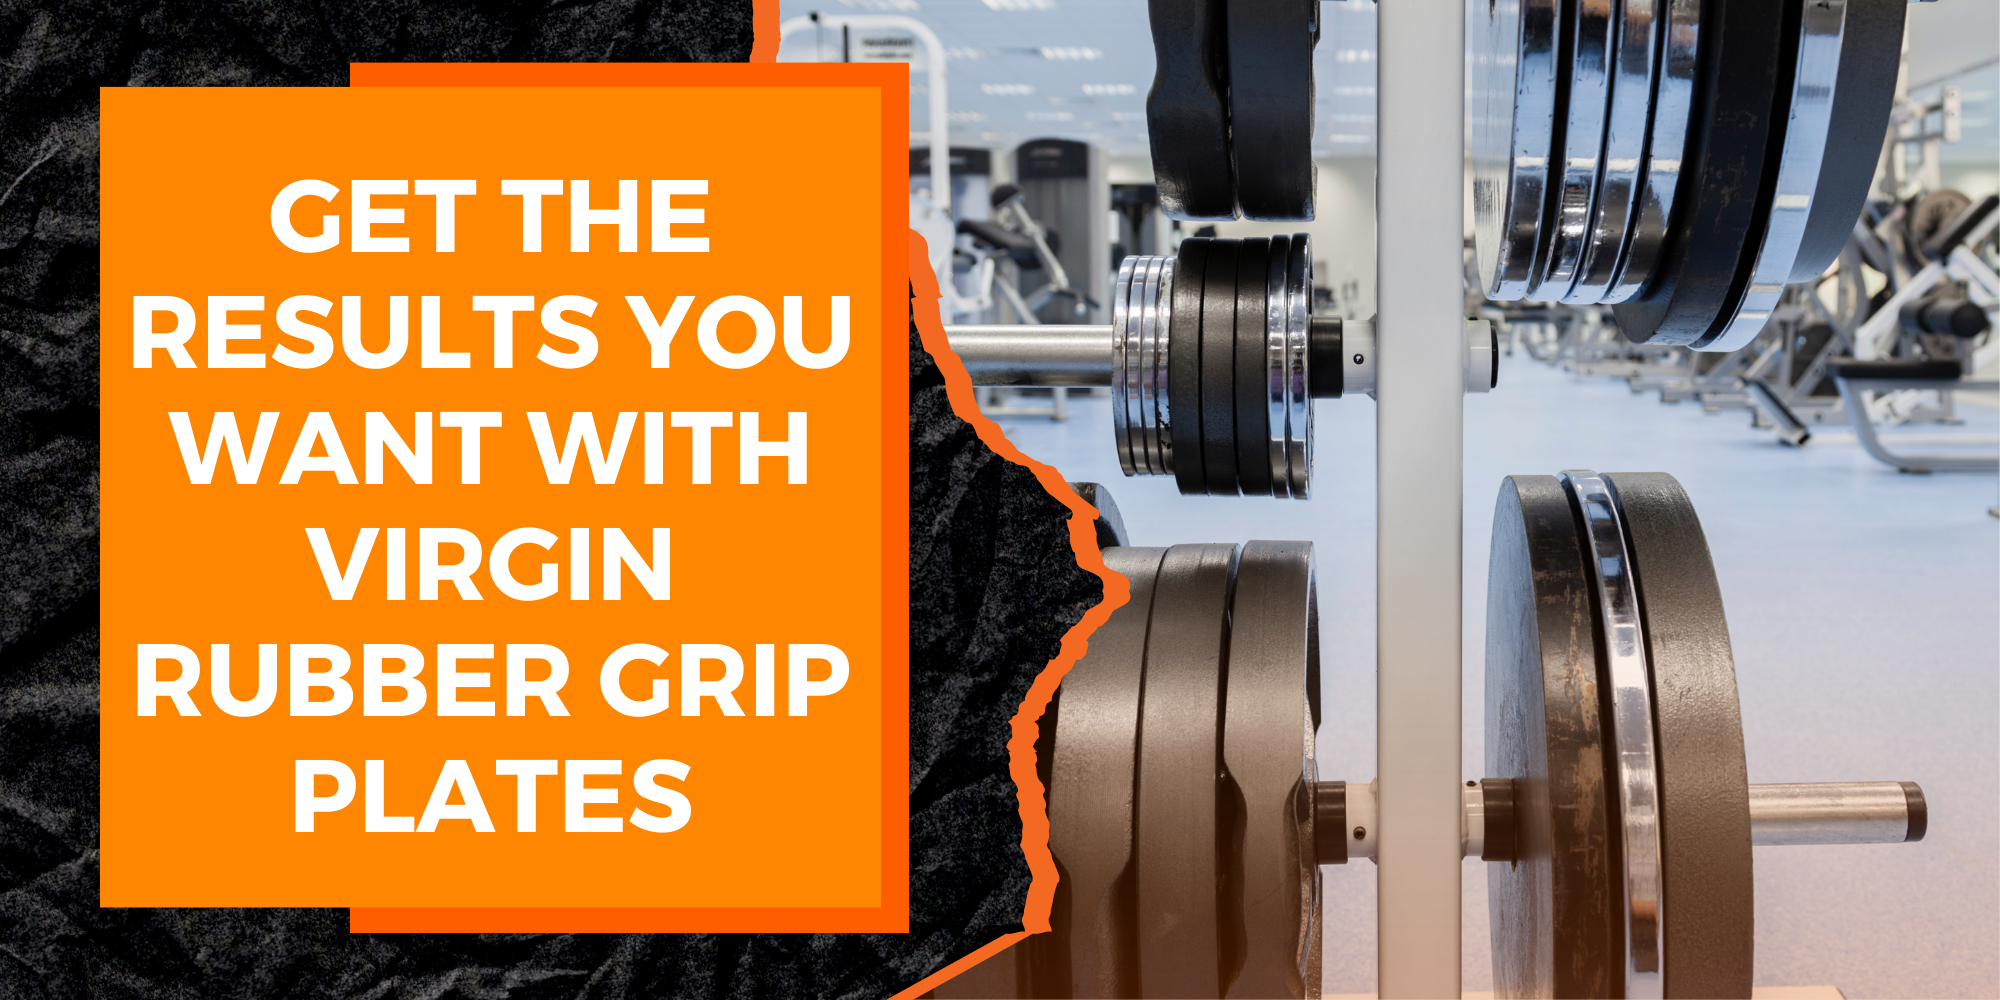 Get the Results You Want with Virgin Rubber Grip Plates